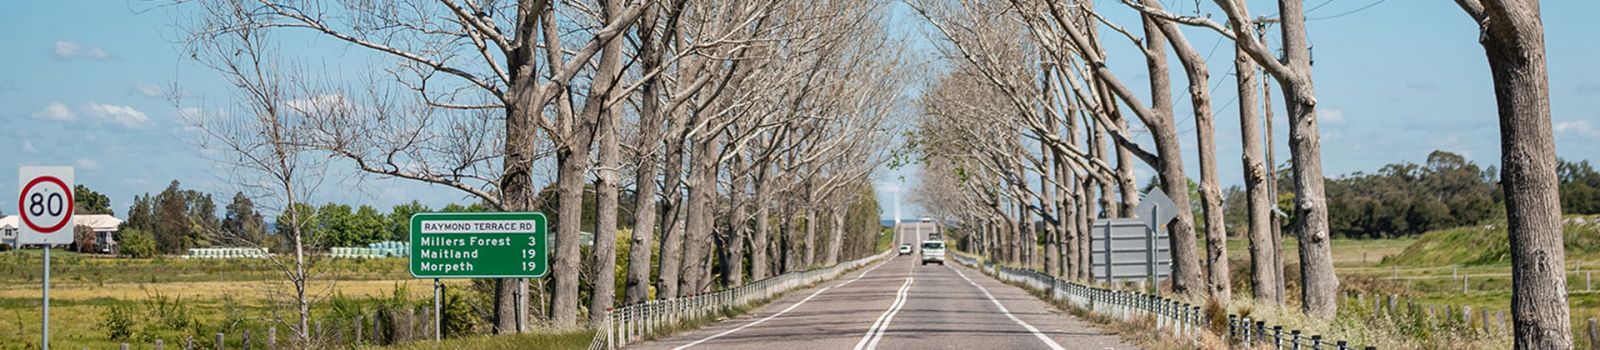 Image of a road surrounding by autumnal trees  banner image